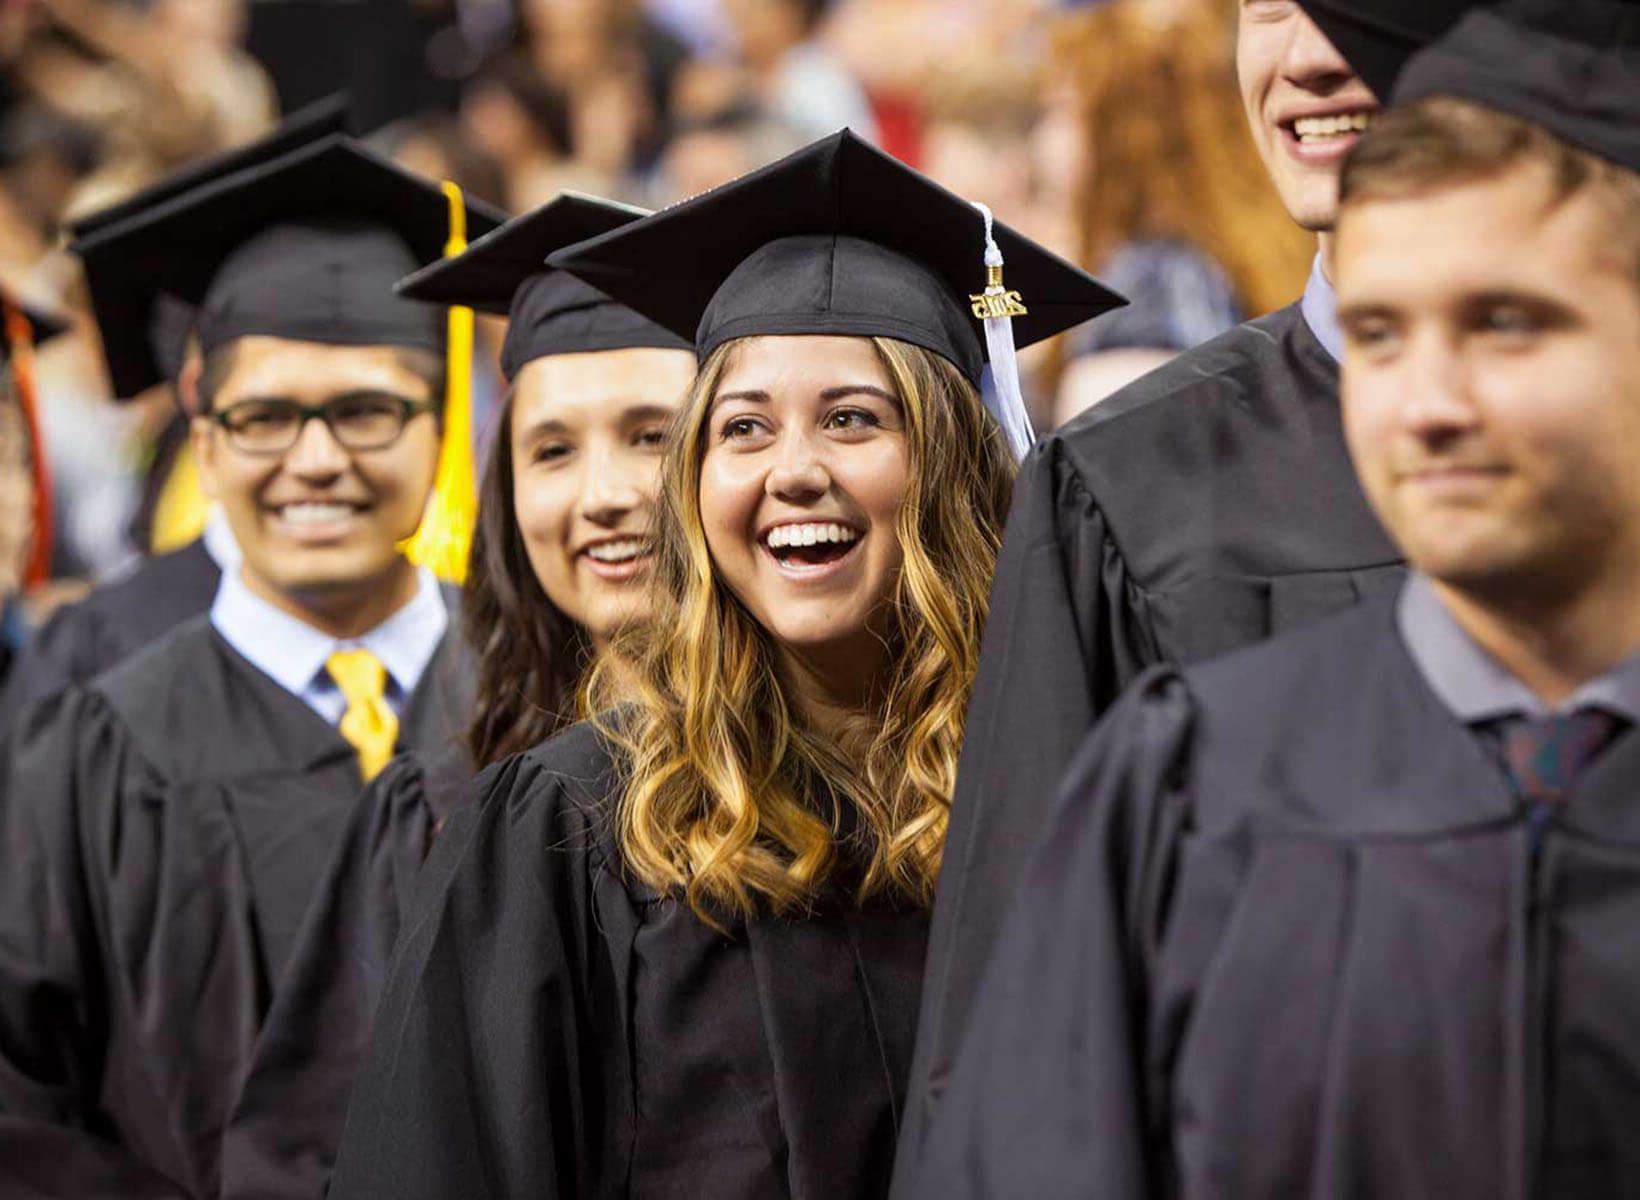 SPU undergraduate students in their caps and gowns during Commencement